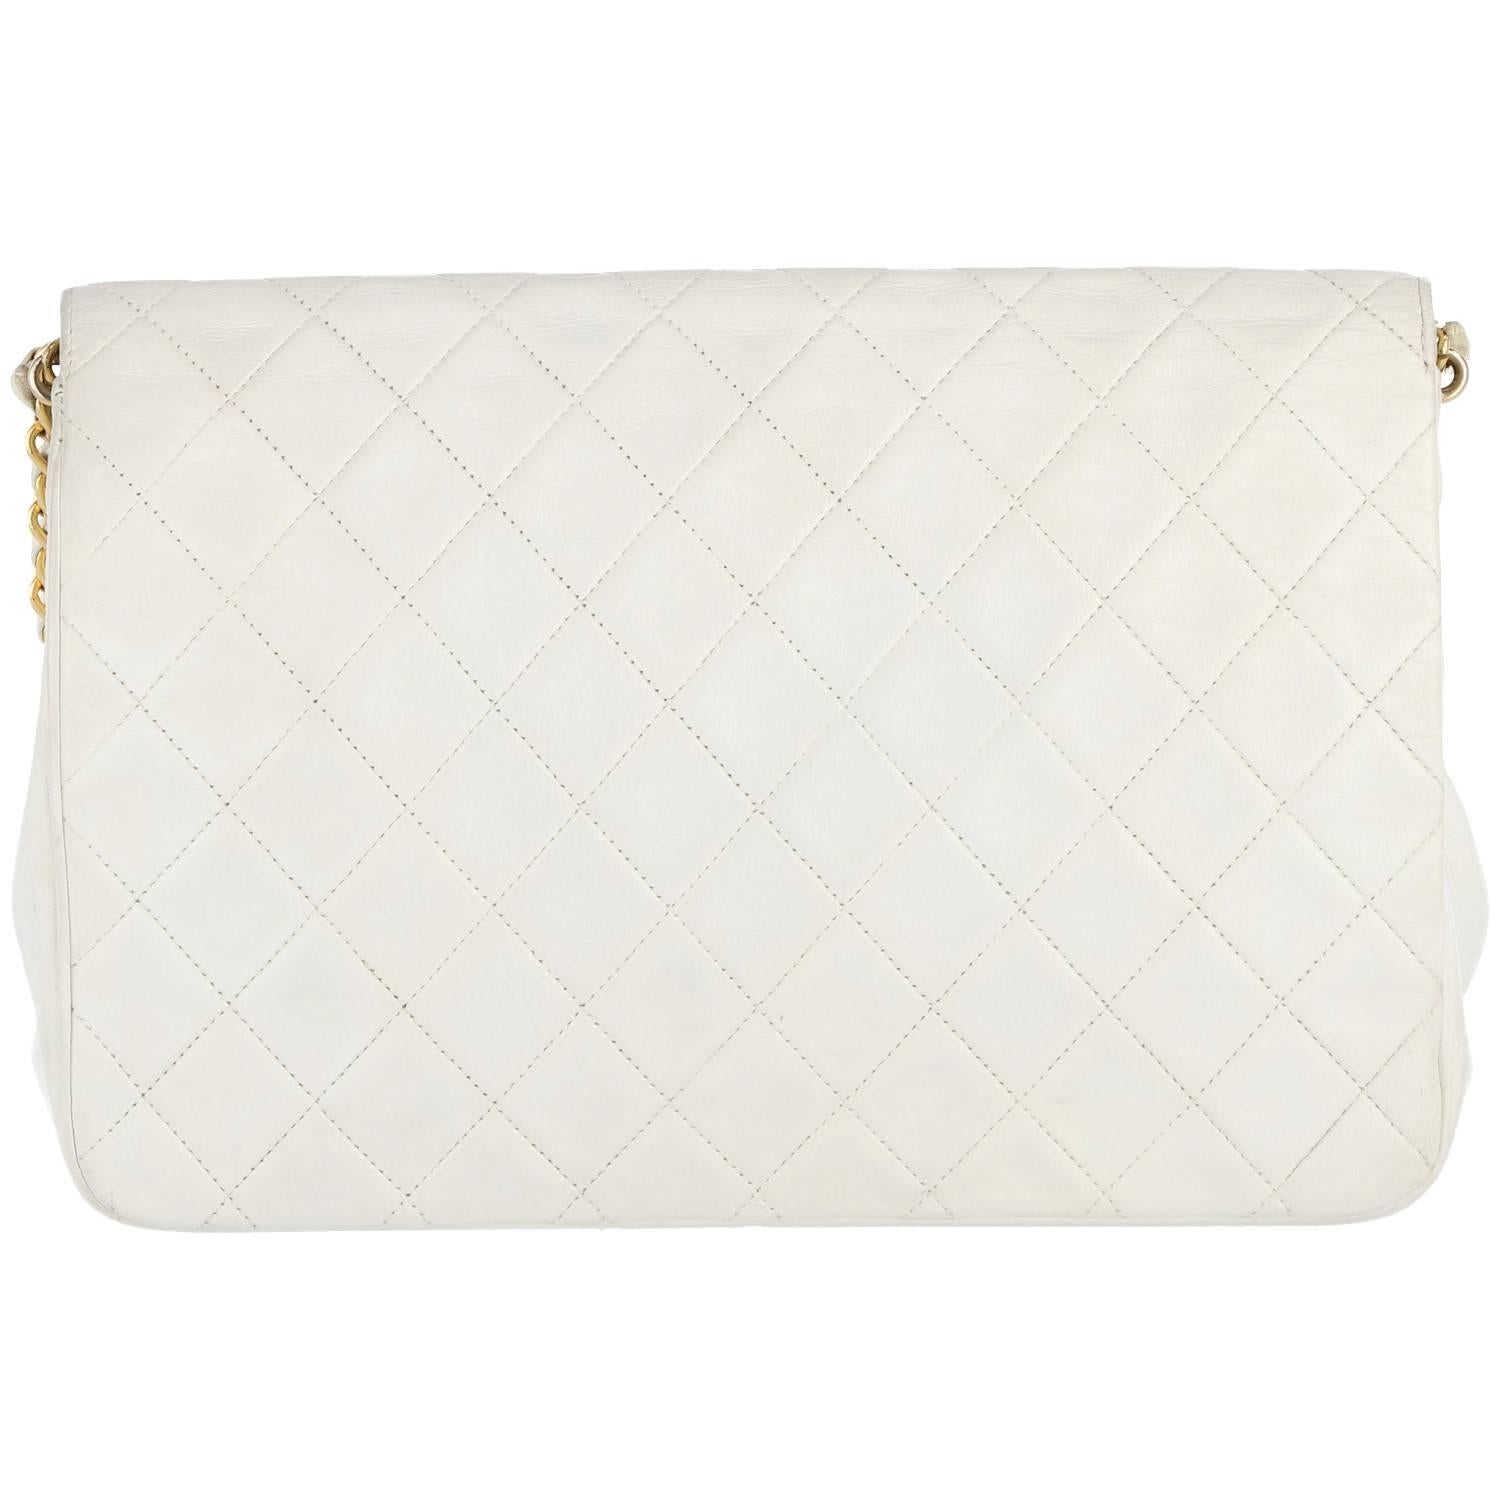 chanel white leather bag